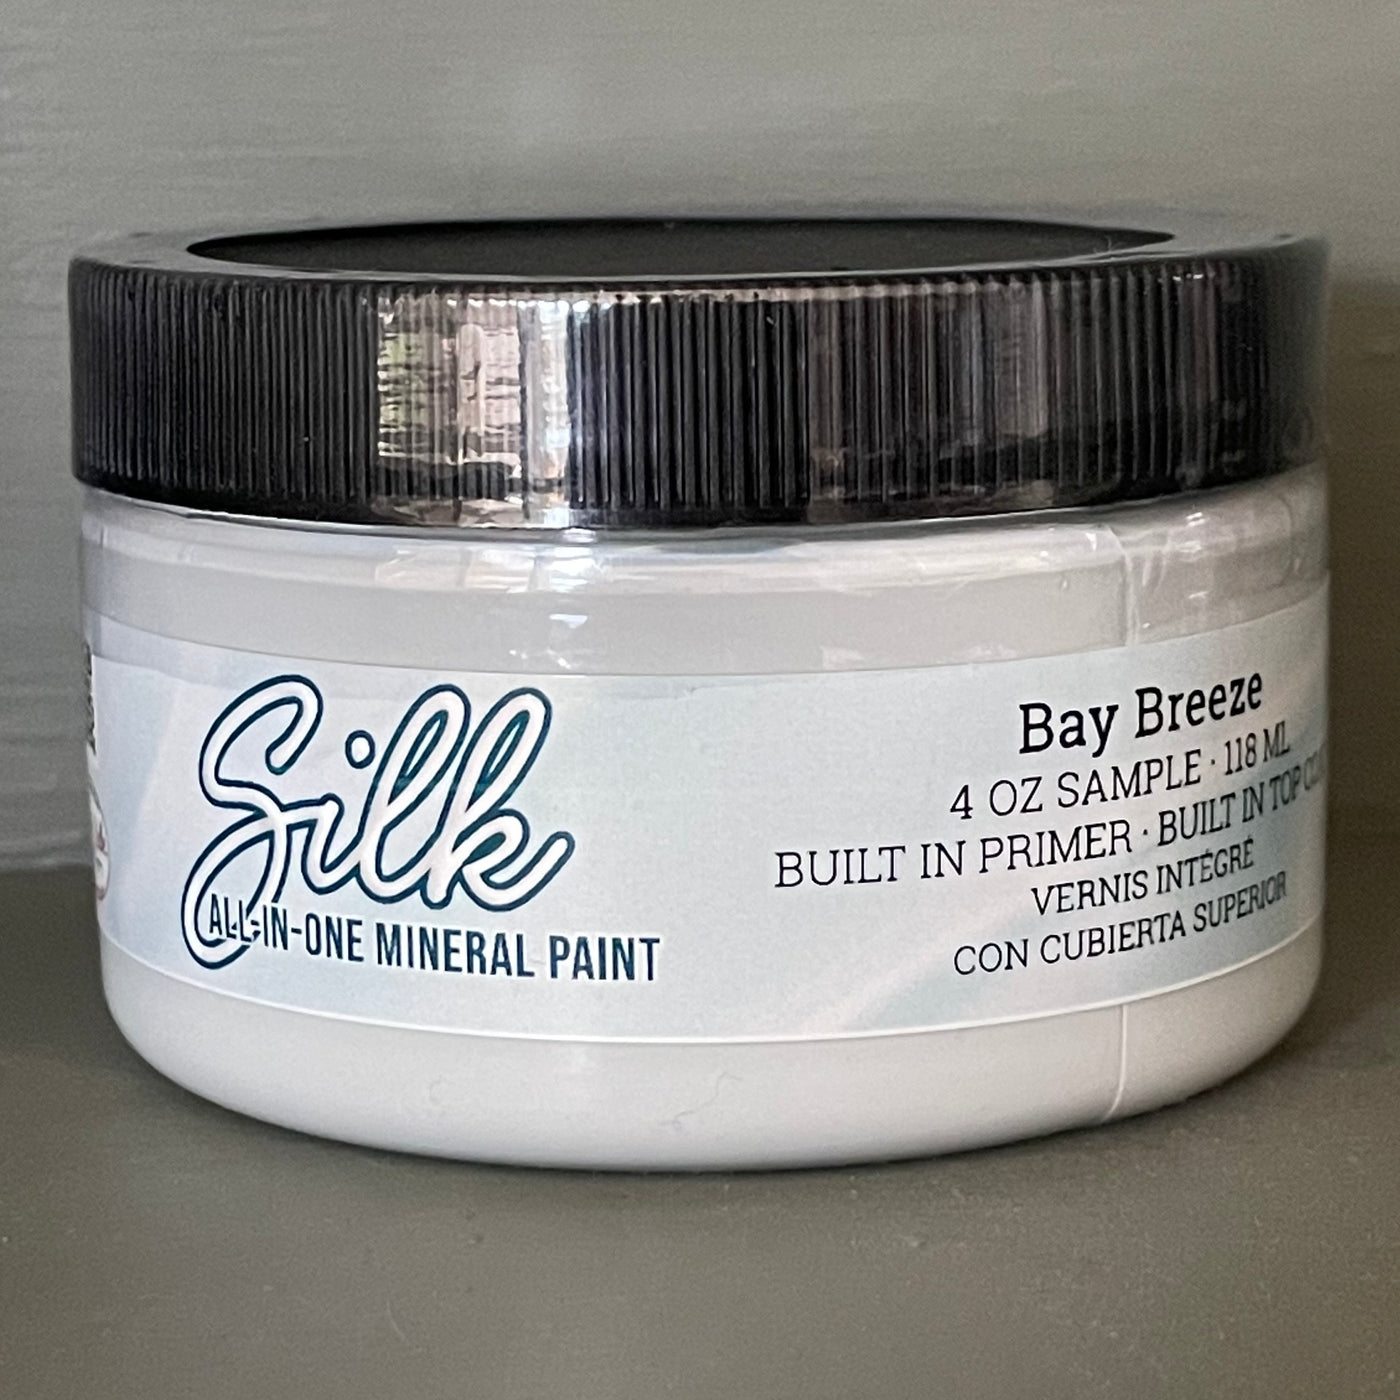 Silk all in one mineral paint Bay Breeze 240ml sample size For the Love Creations